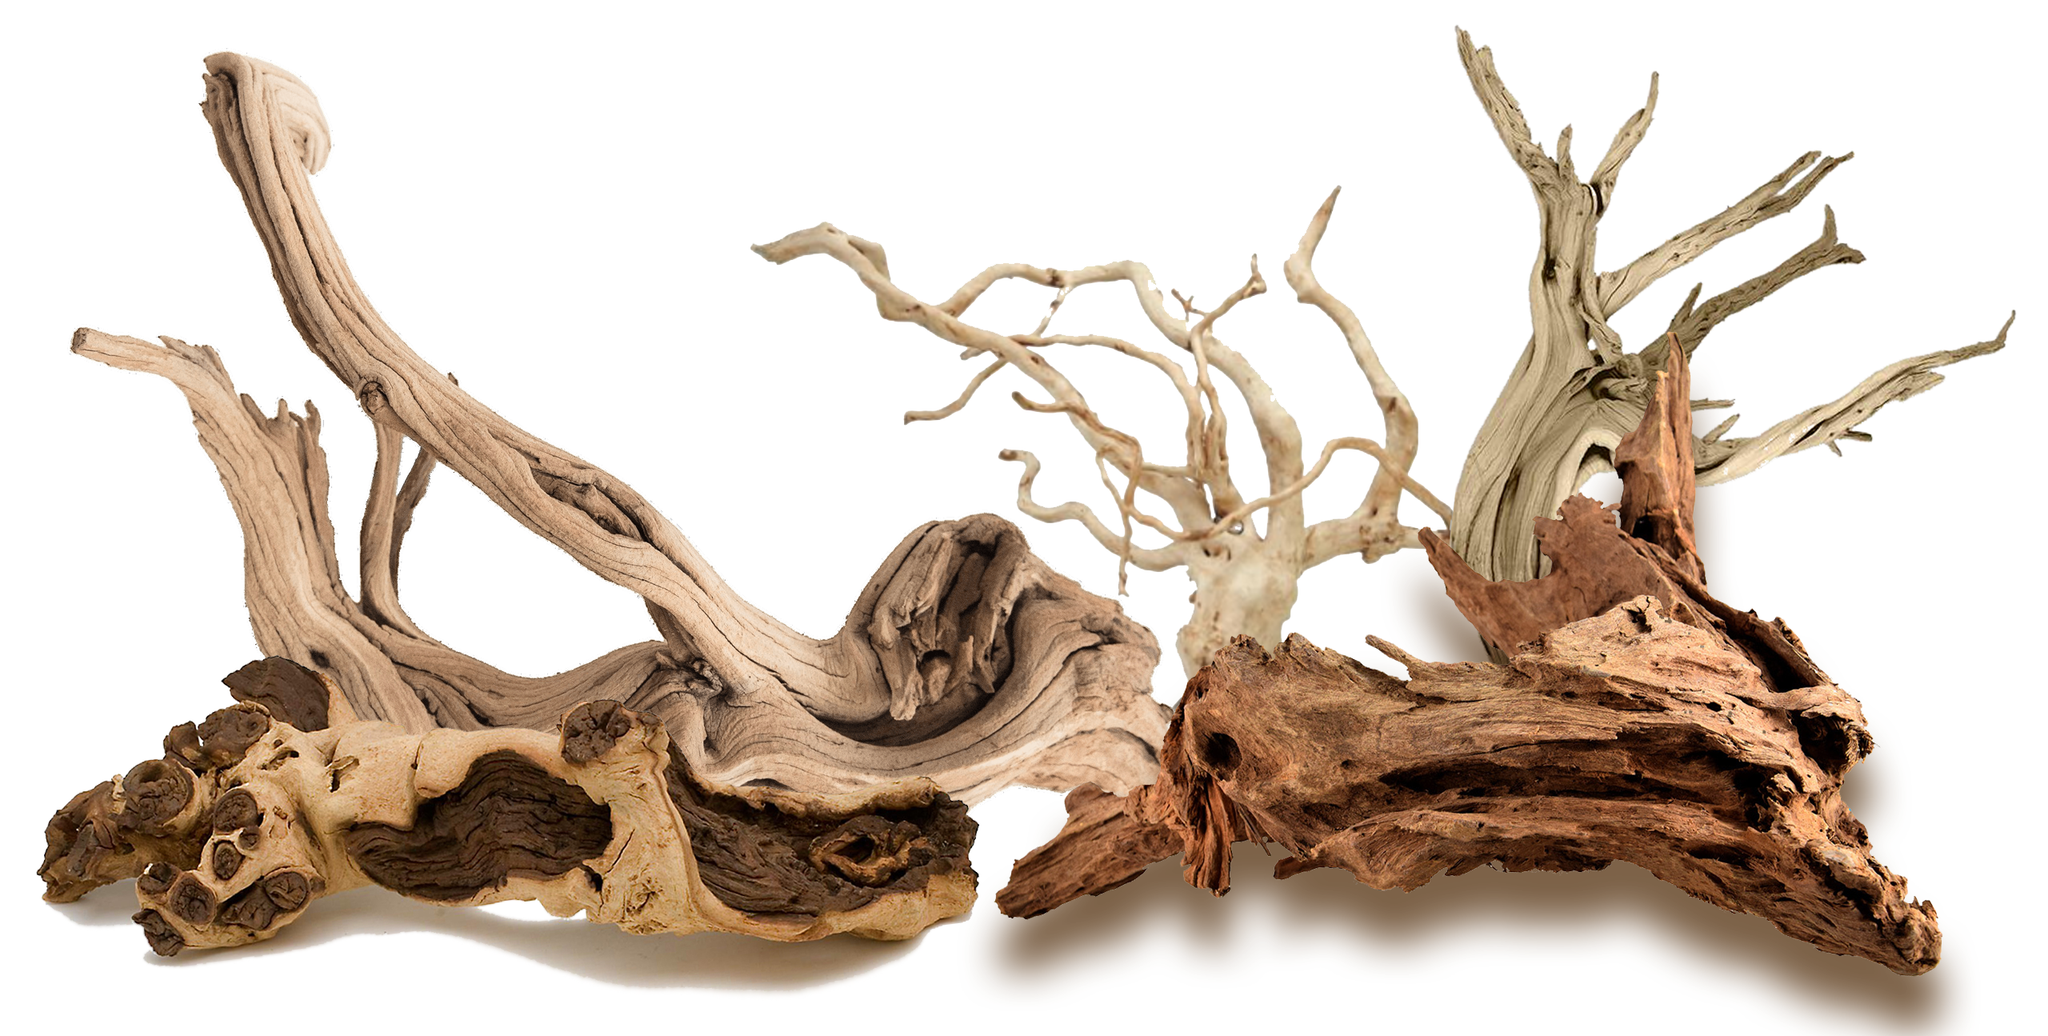 Driftwood in Aquariums - What You Should Know